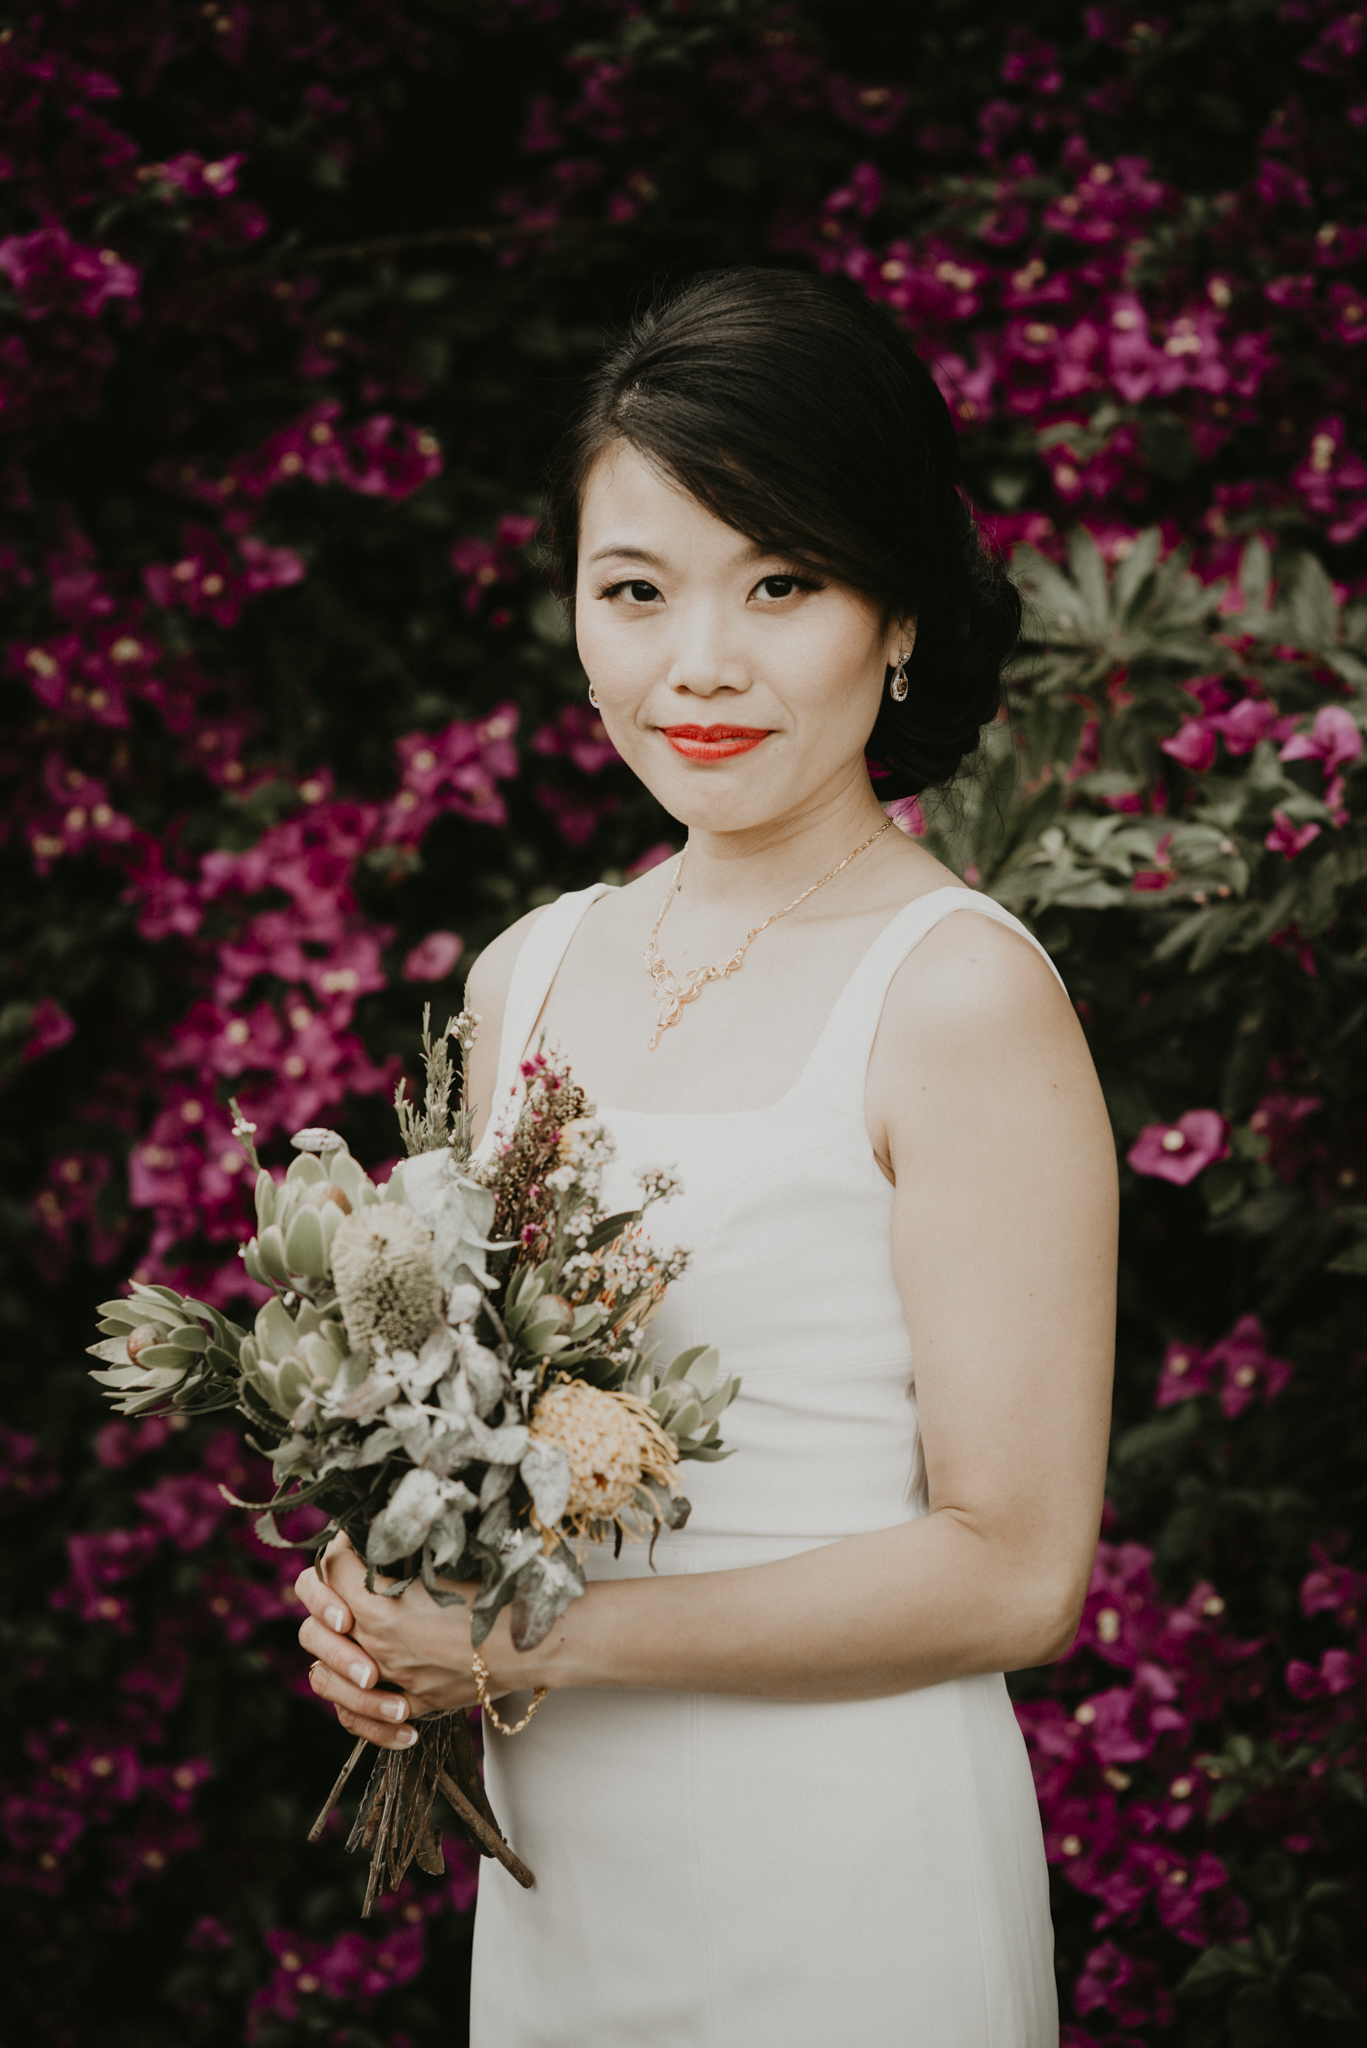 agnes-duy-15th-december-2018-chinese-vietnamese-wedding-tea-ceremony-yarraville-home-house-documentary-candid-photographer-sarah-matler-photography-102